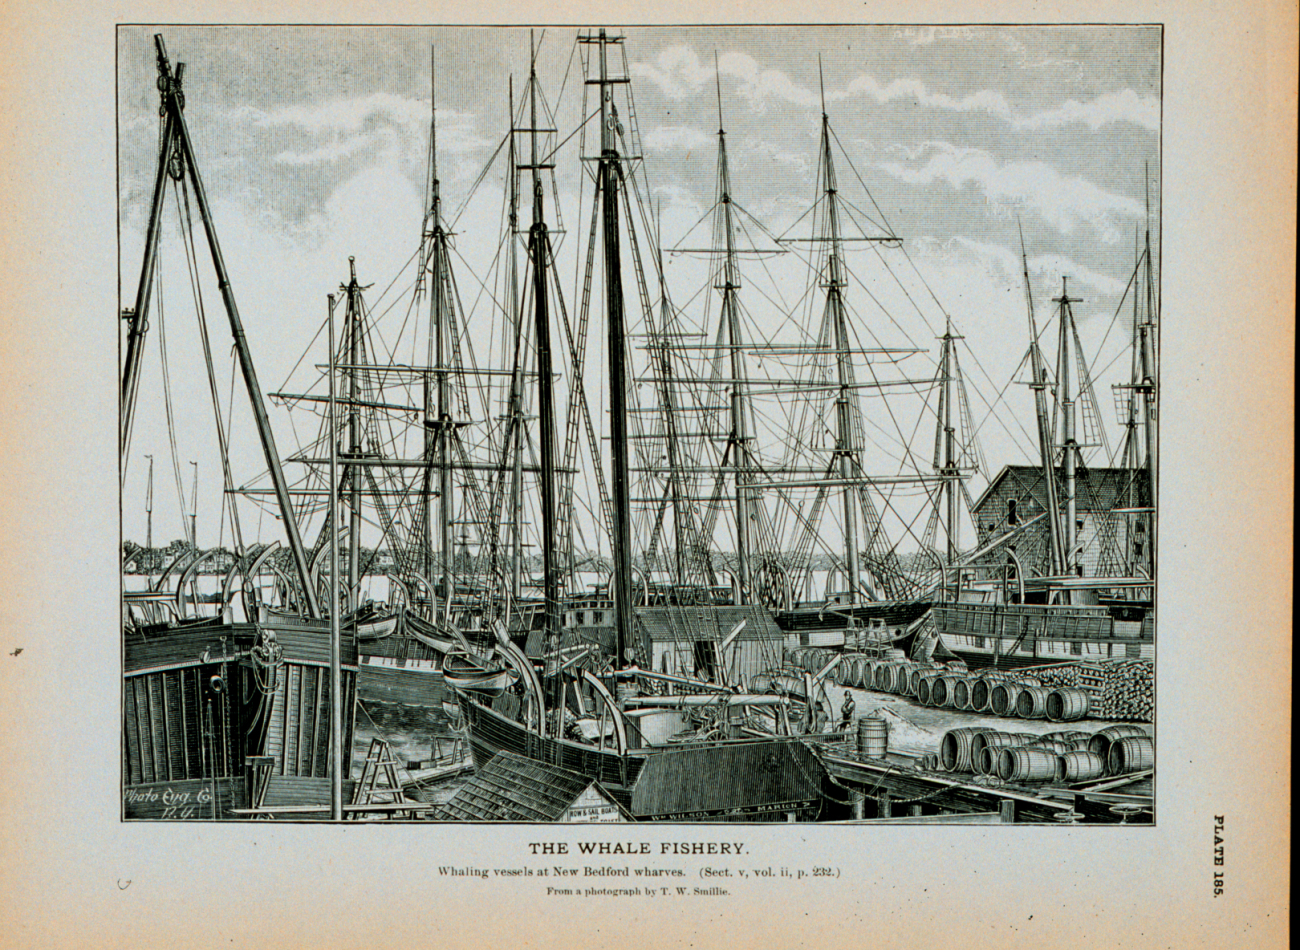 Whaling vessels fitted out at New Bedford wharvesFrom a photograph by T